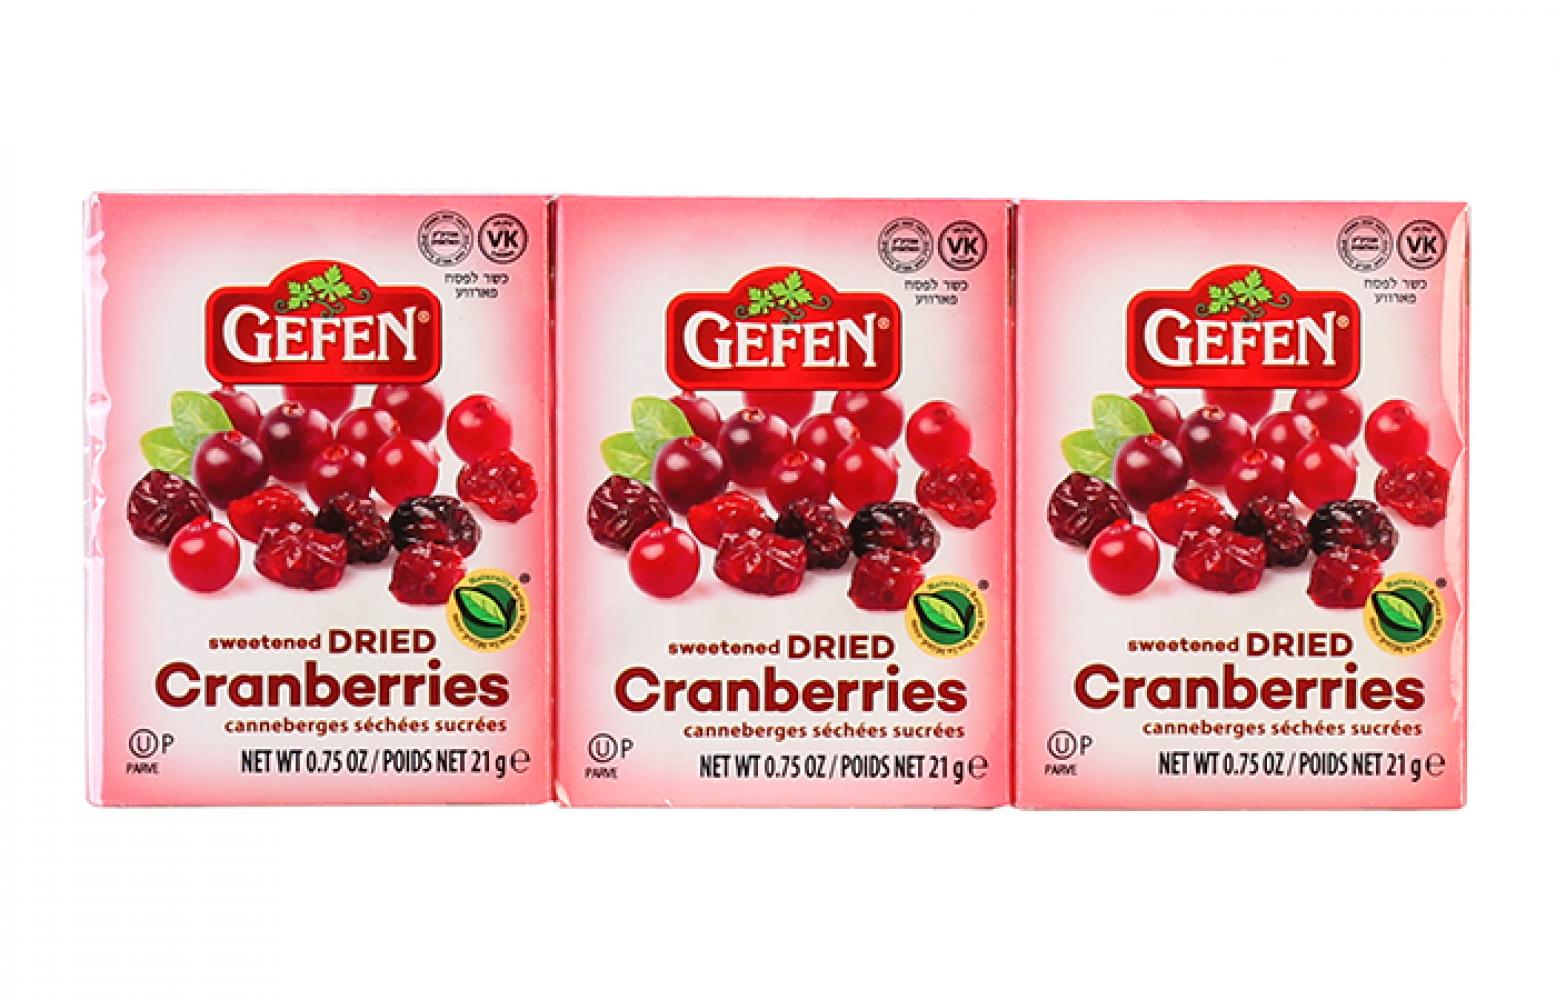 GEFEN: Sweetened Dried Cranberries 6-0.75oz, 4.5 oz - Vending Business Solutions